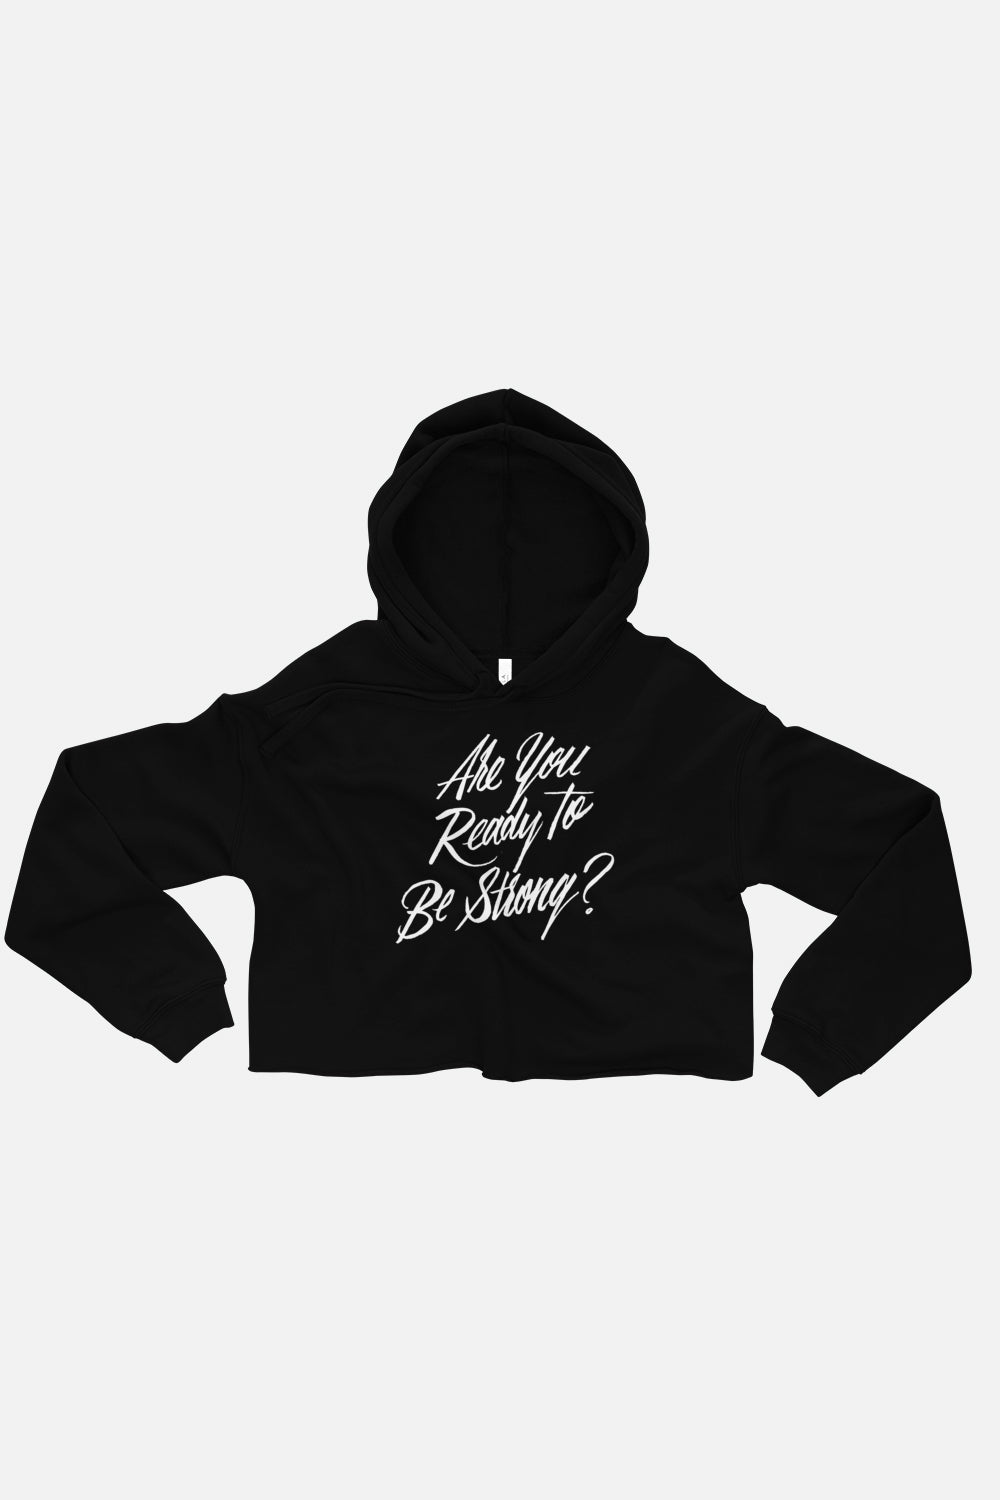 Are You Ready to Be Strong? Fitted Crop Hoodie